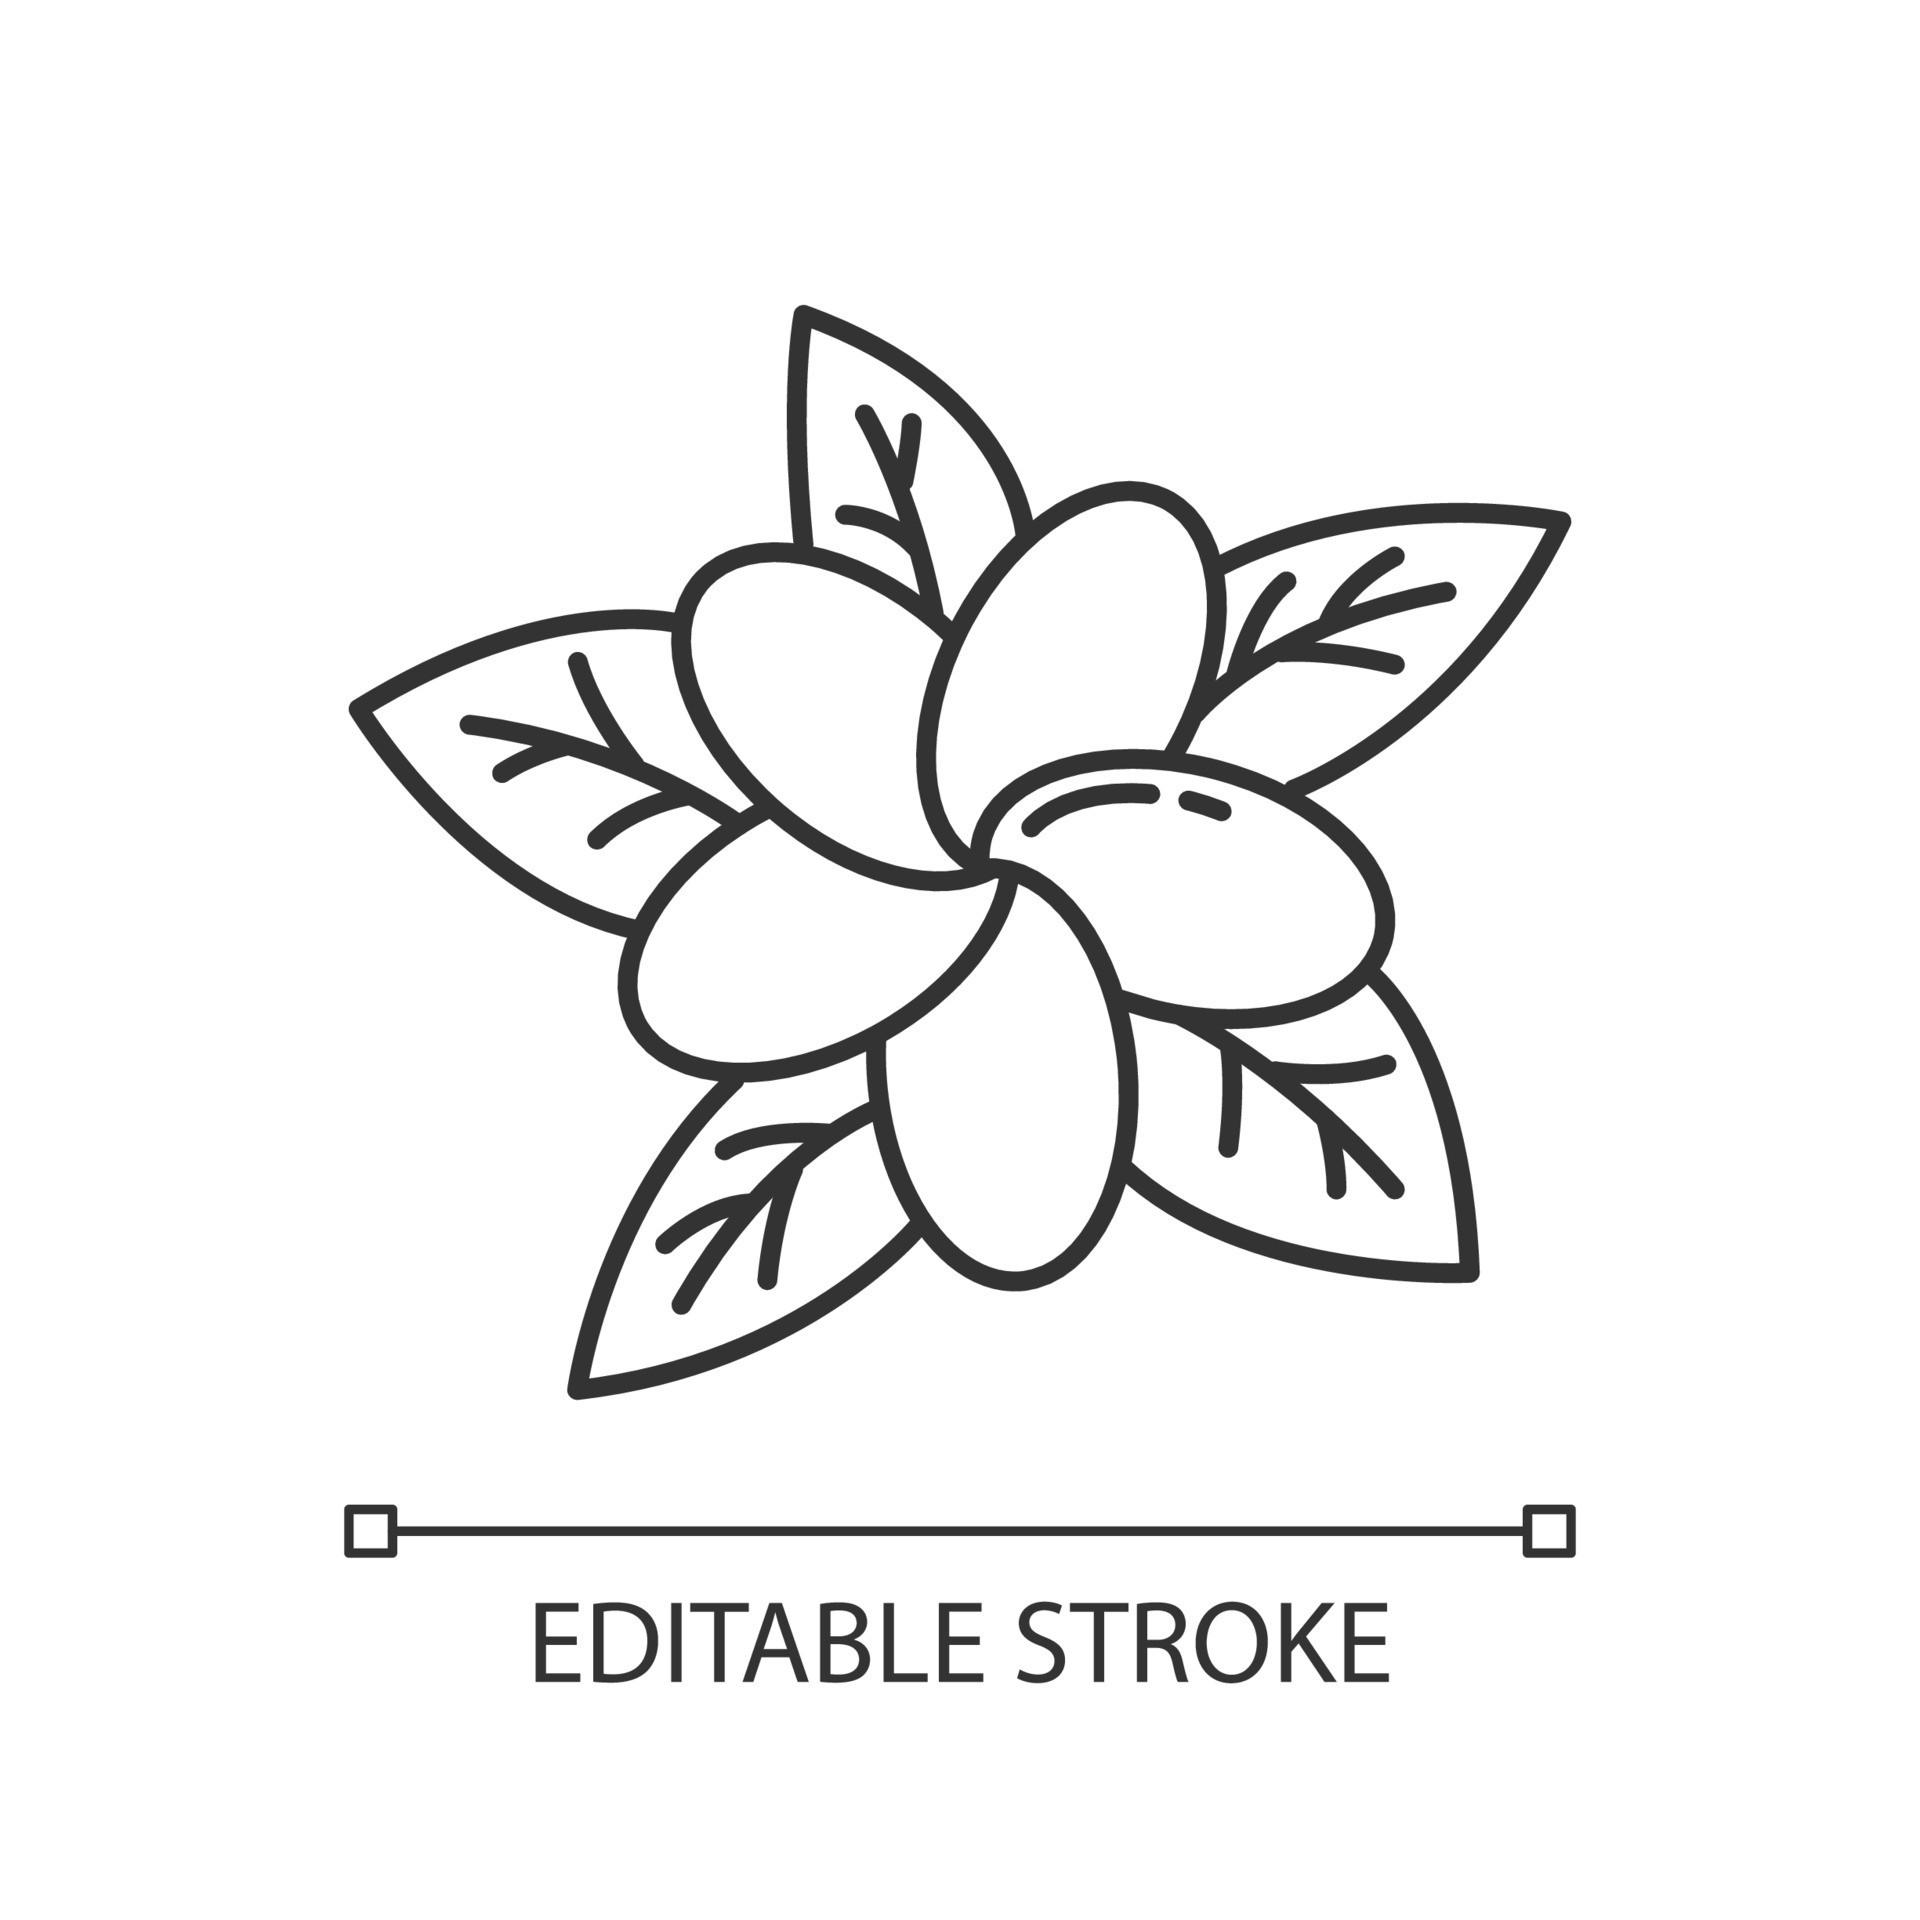 https://static.vecteezy.com/system/resources/previews/004/985/675/original/plumeria-linear-light-icon-exotic-region-flowers-flora-of-indonesia-tropical-plants-blossom-of-frangipani-thin-line-illustration-contour-symbol-isolated-outline-drawing-editable-stroke-vector.jpg